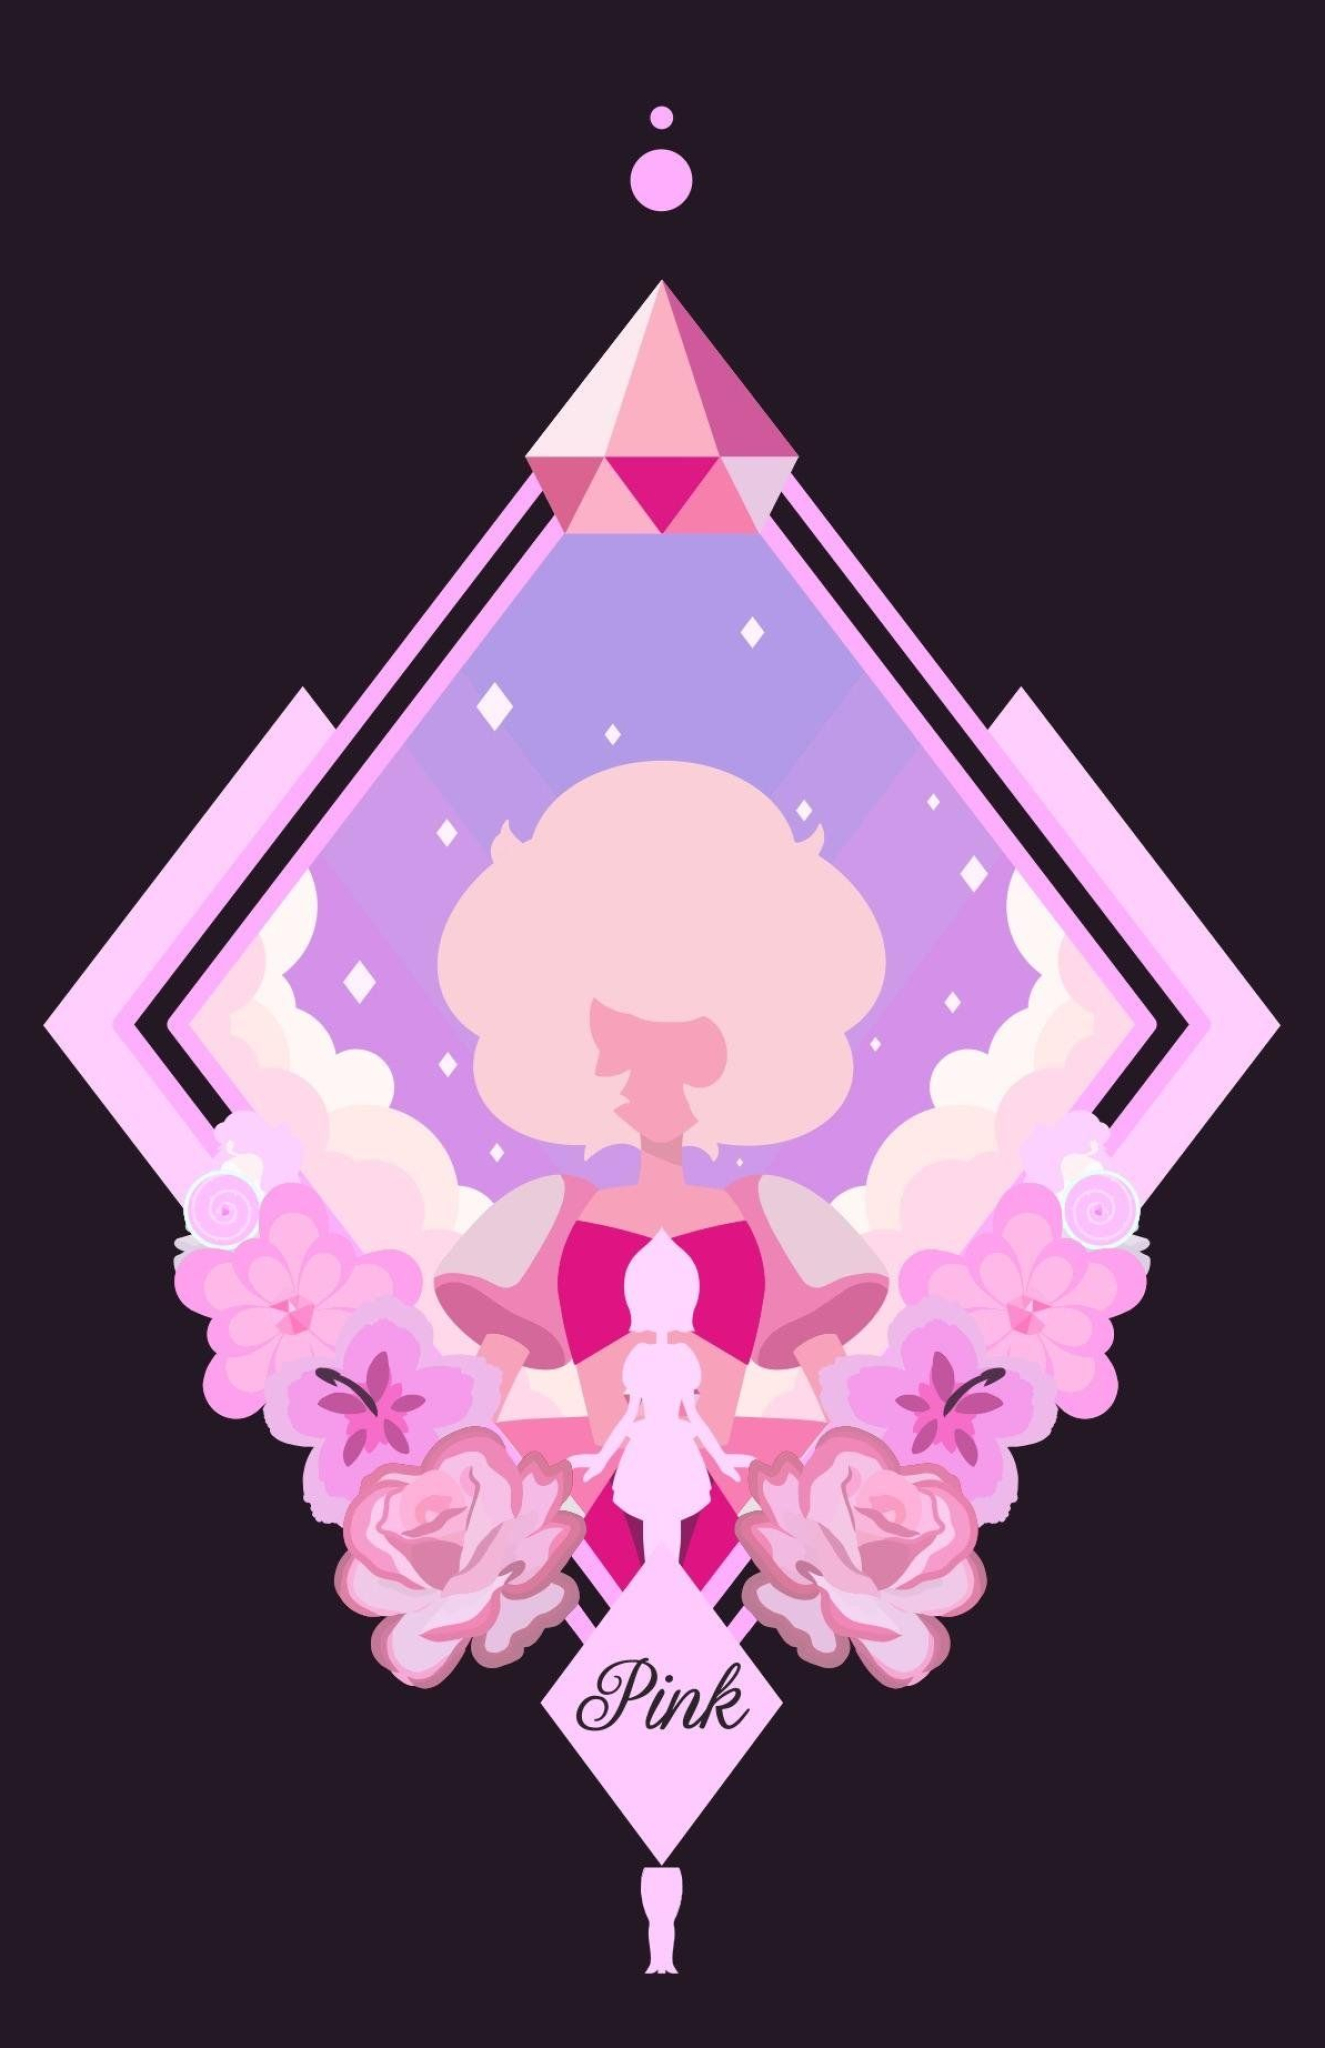 A cartoon character with pink hair and flowers - Diamond